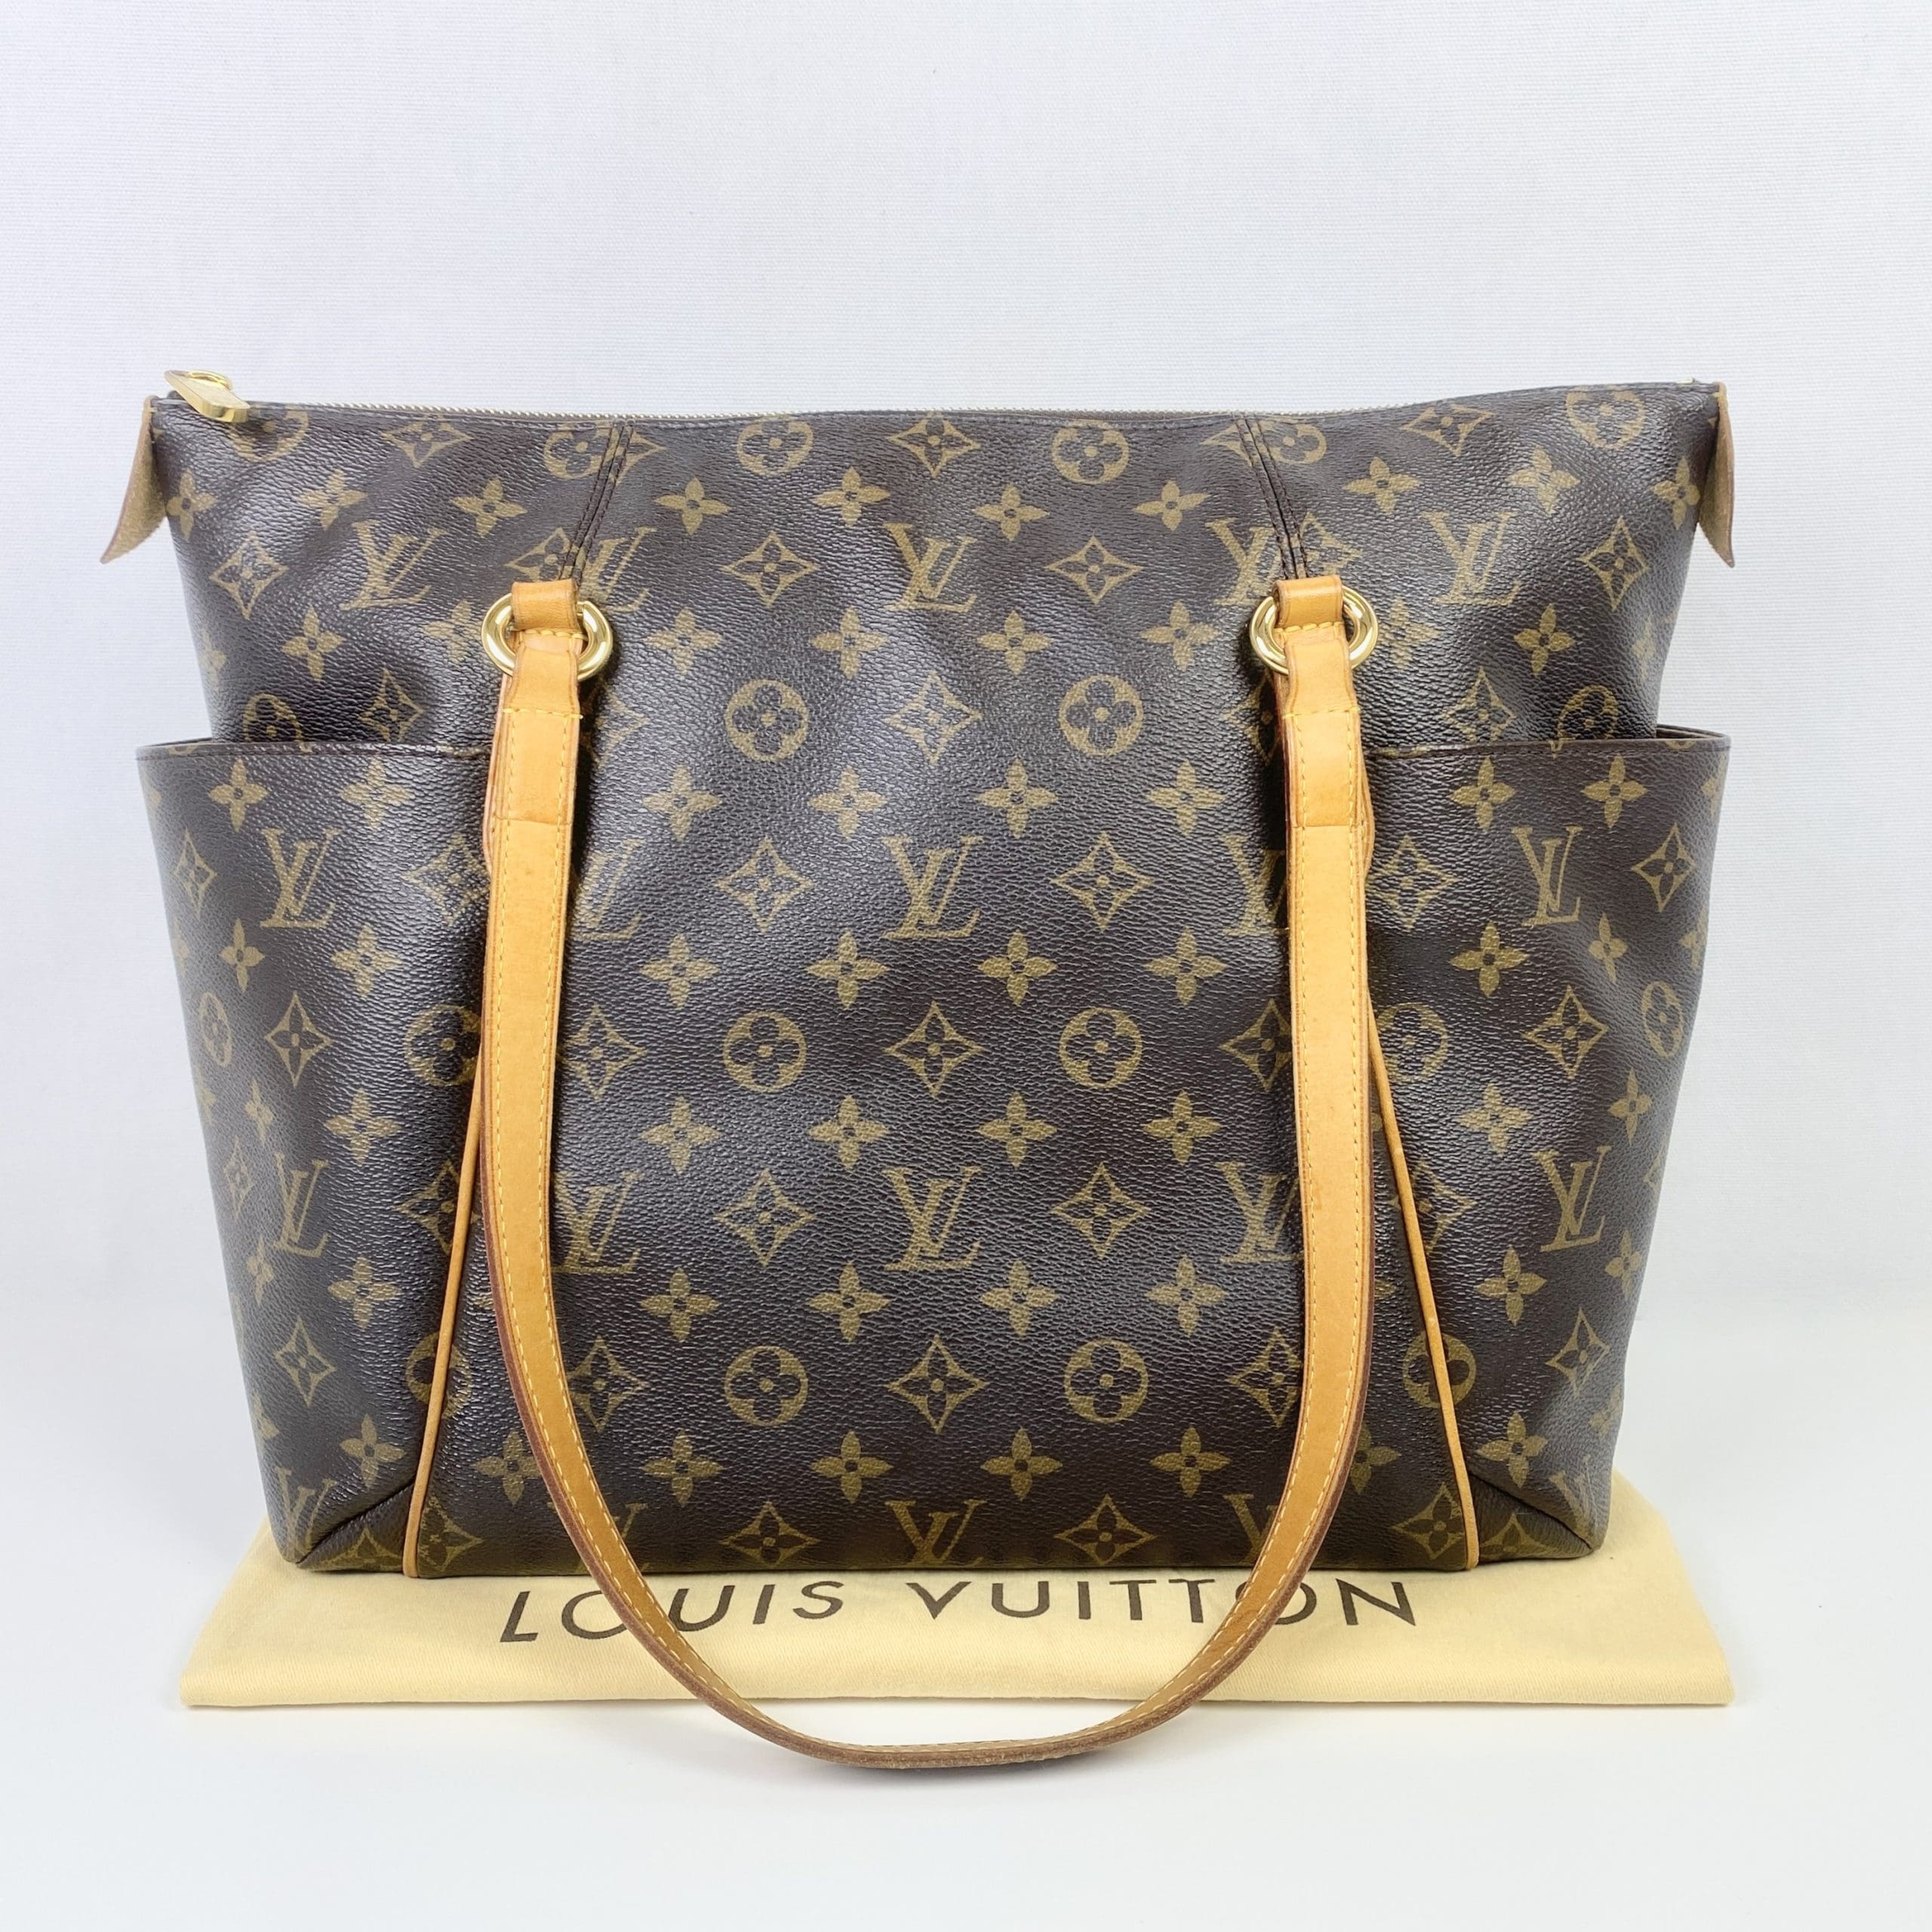 Authentic Vintage Louis Vuitton Monogram Totally MM Tote only